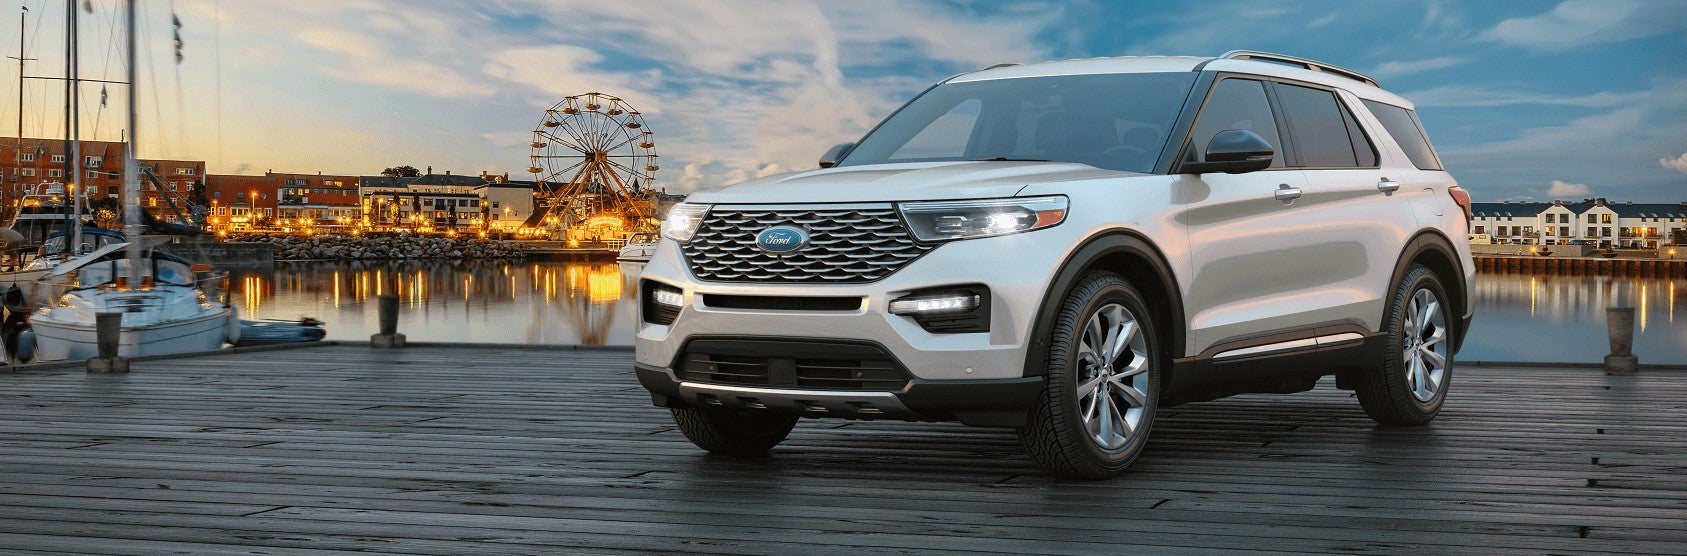 2021 Ford Explorer Review Waldorf MD